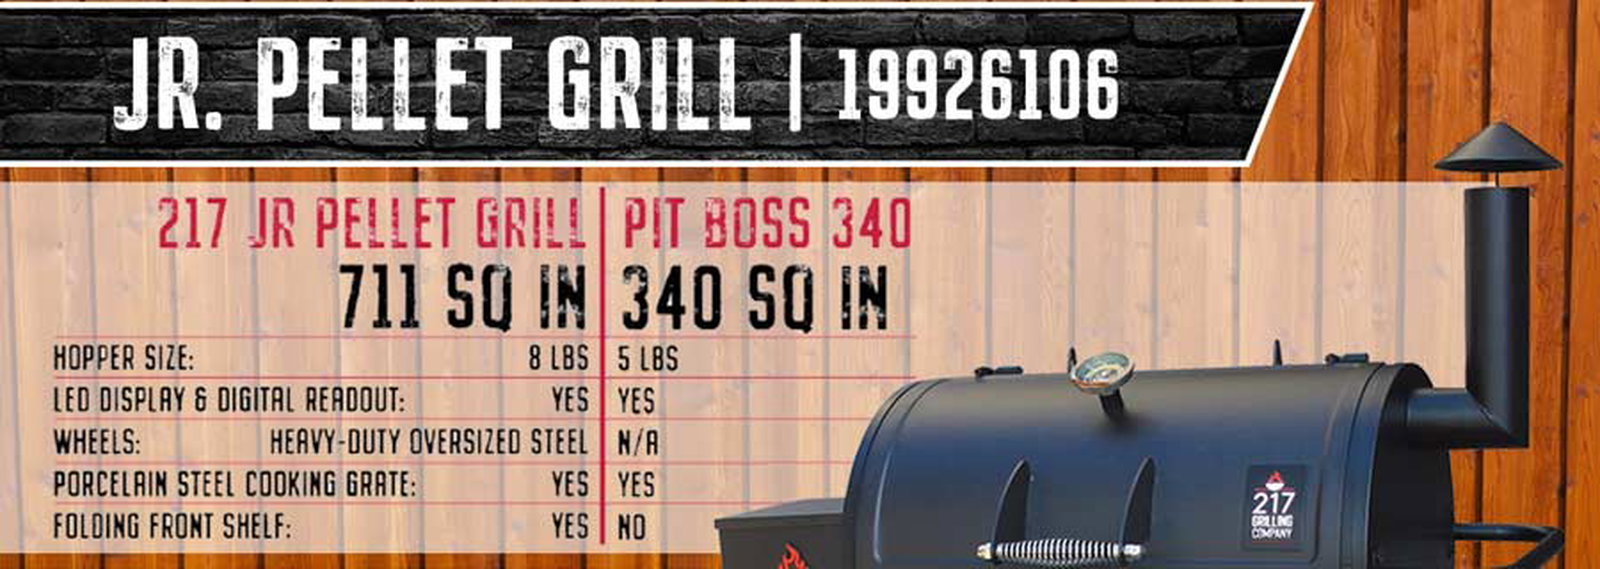 Rural King Com The Best Pellet Grill For Your Money Milled